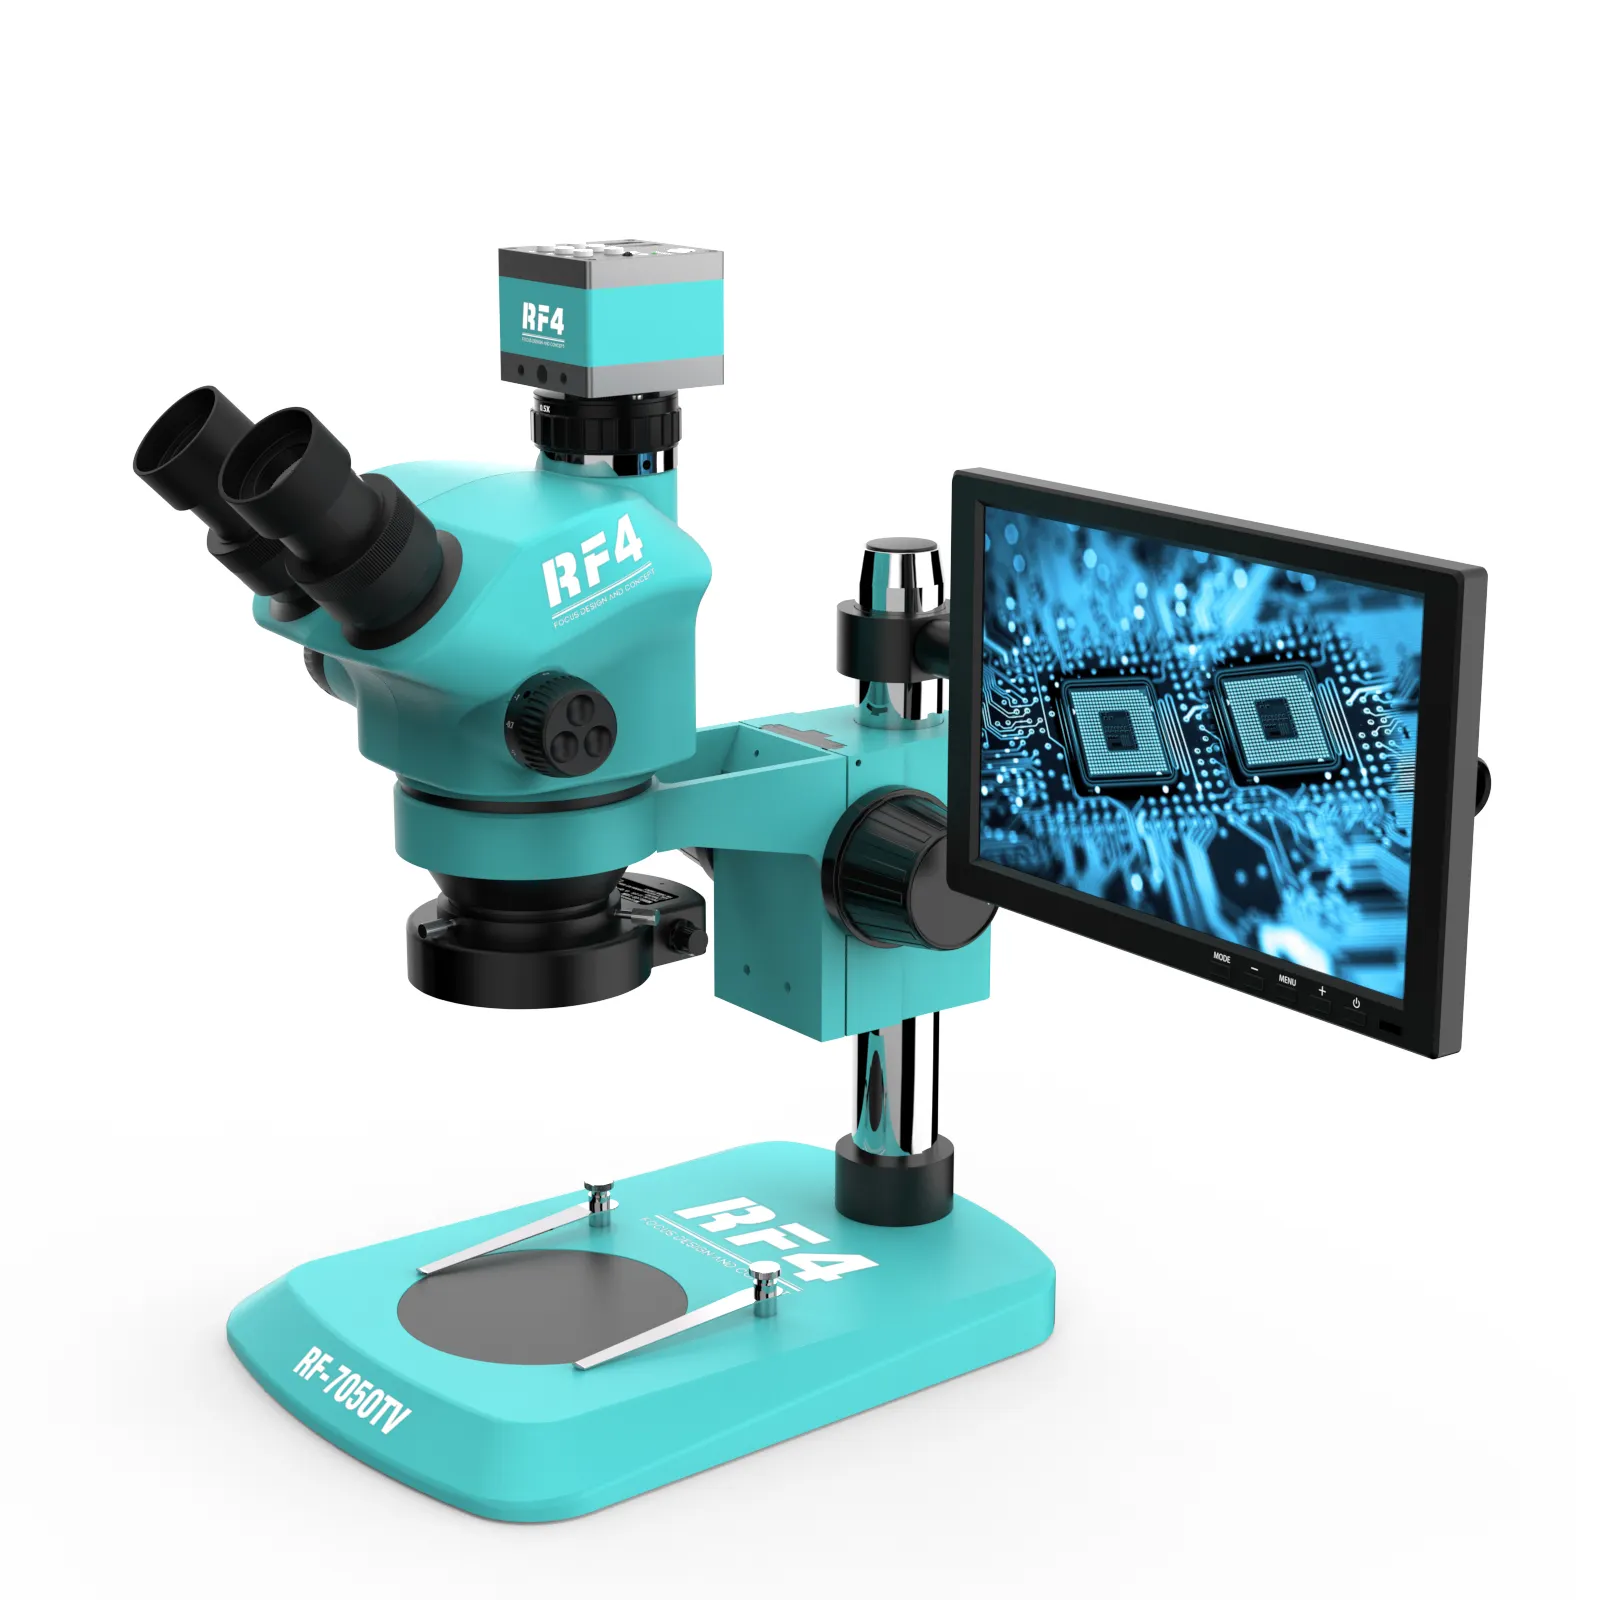 RF-7050TV-2KC-S010 stereo trinocular zoom mobile repair 2K camera microscopes Magnification 7-50x with display screen